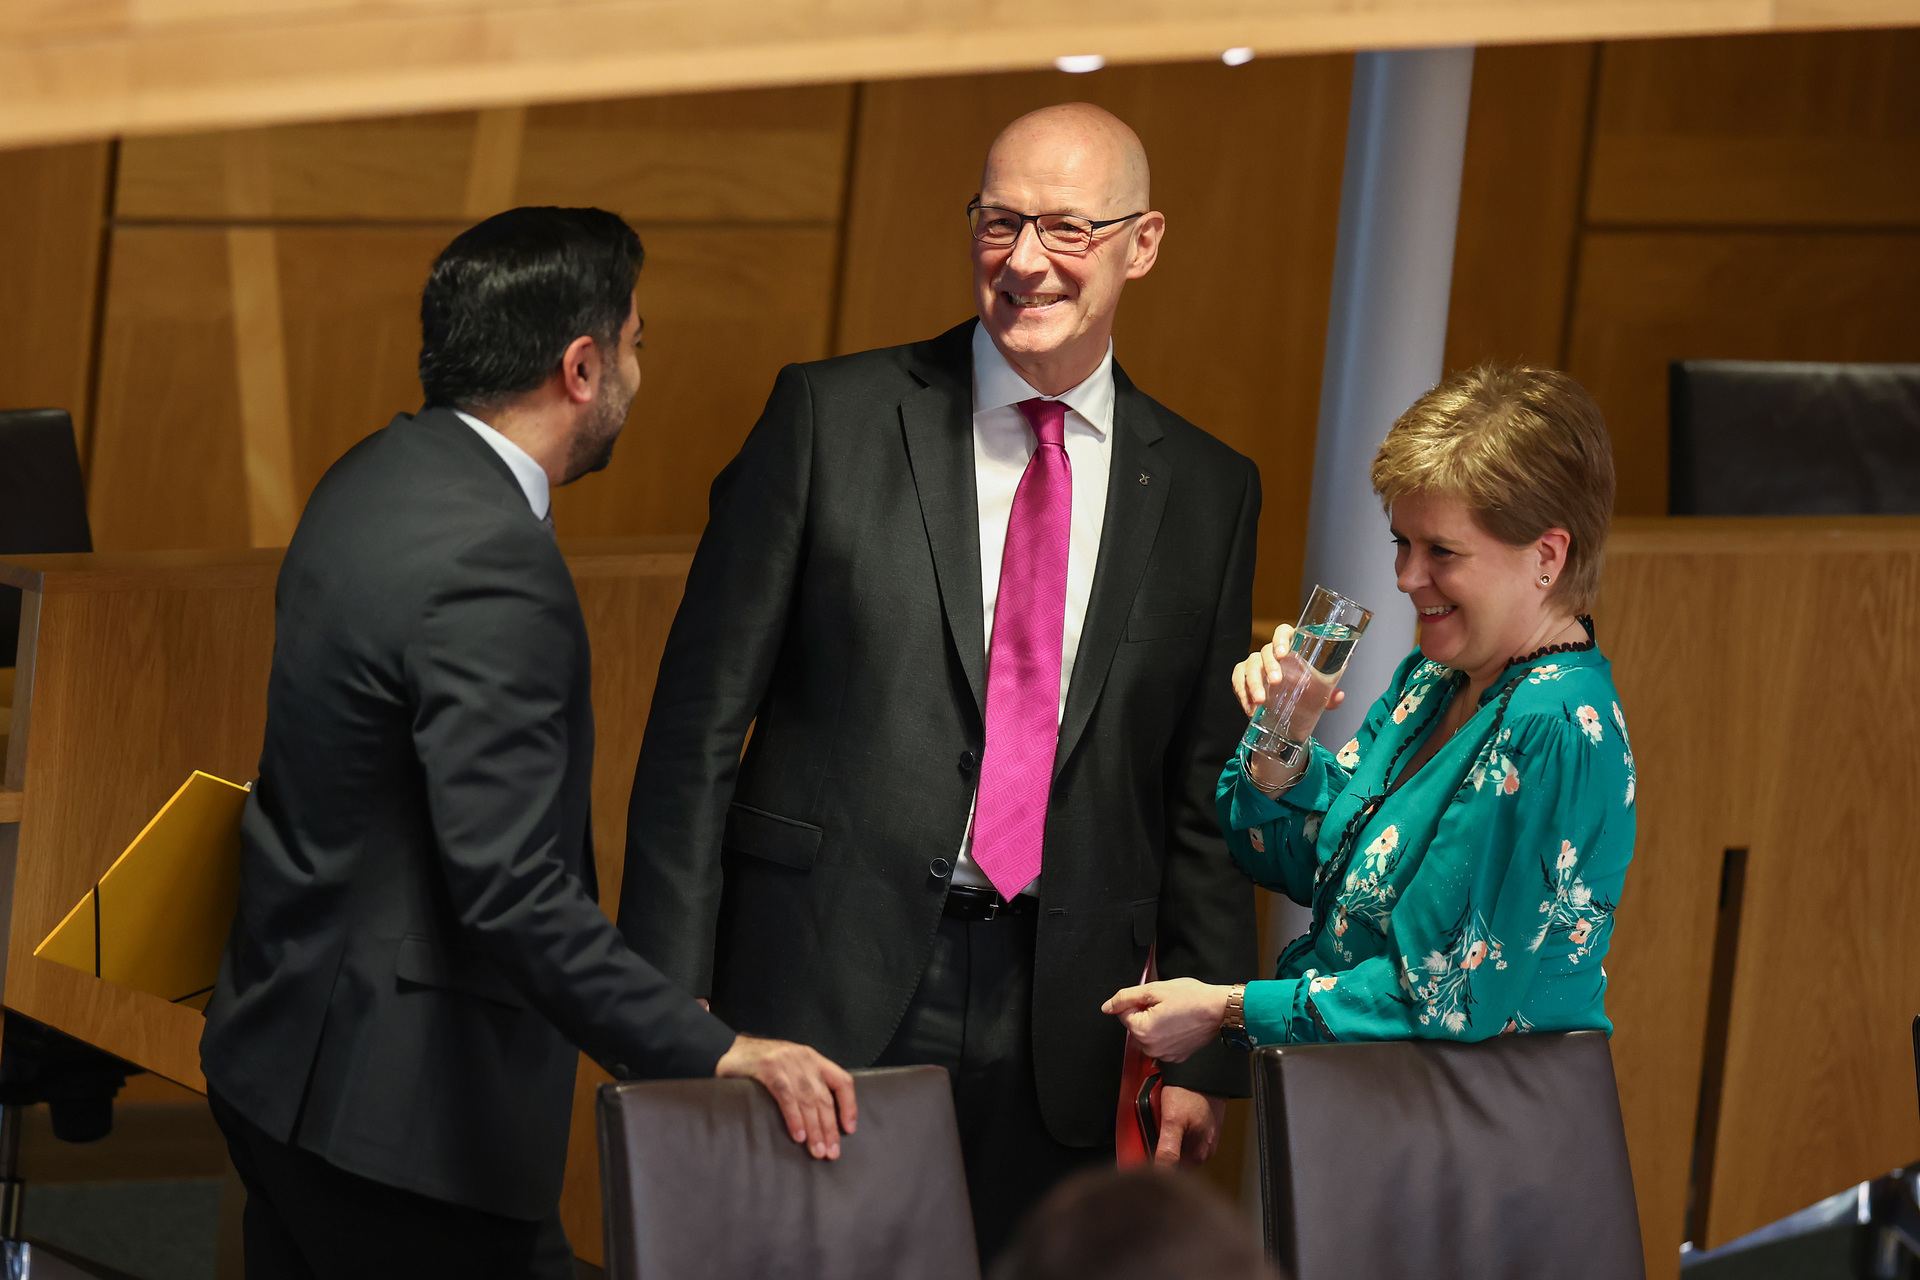 Humza Yousaf and John Swinney and Nicola Sturgeon react after he delivered his farewell speech as First Minister at the Scottish Parliament.